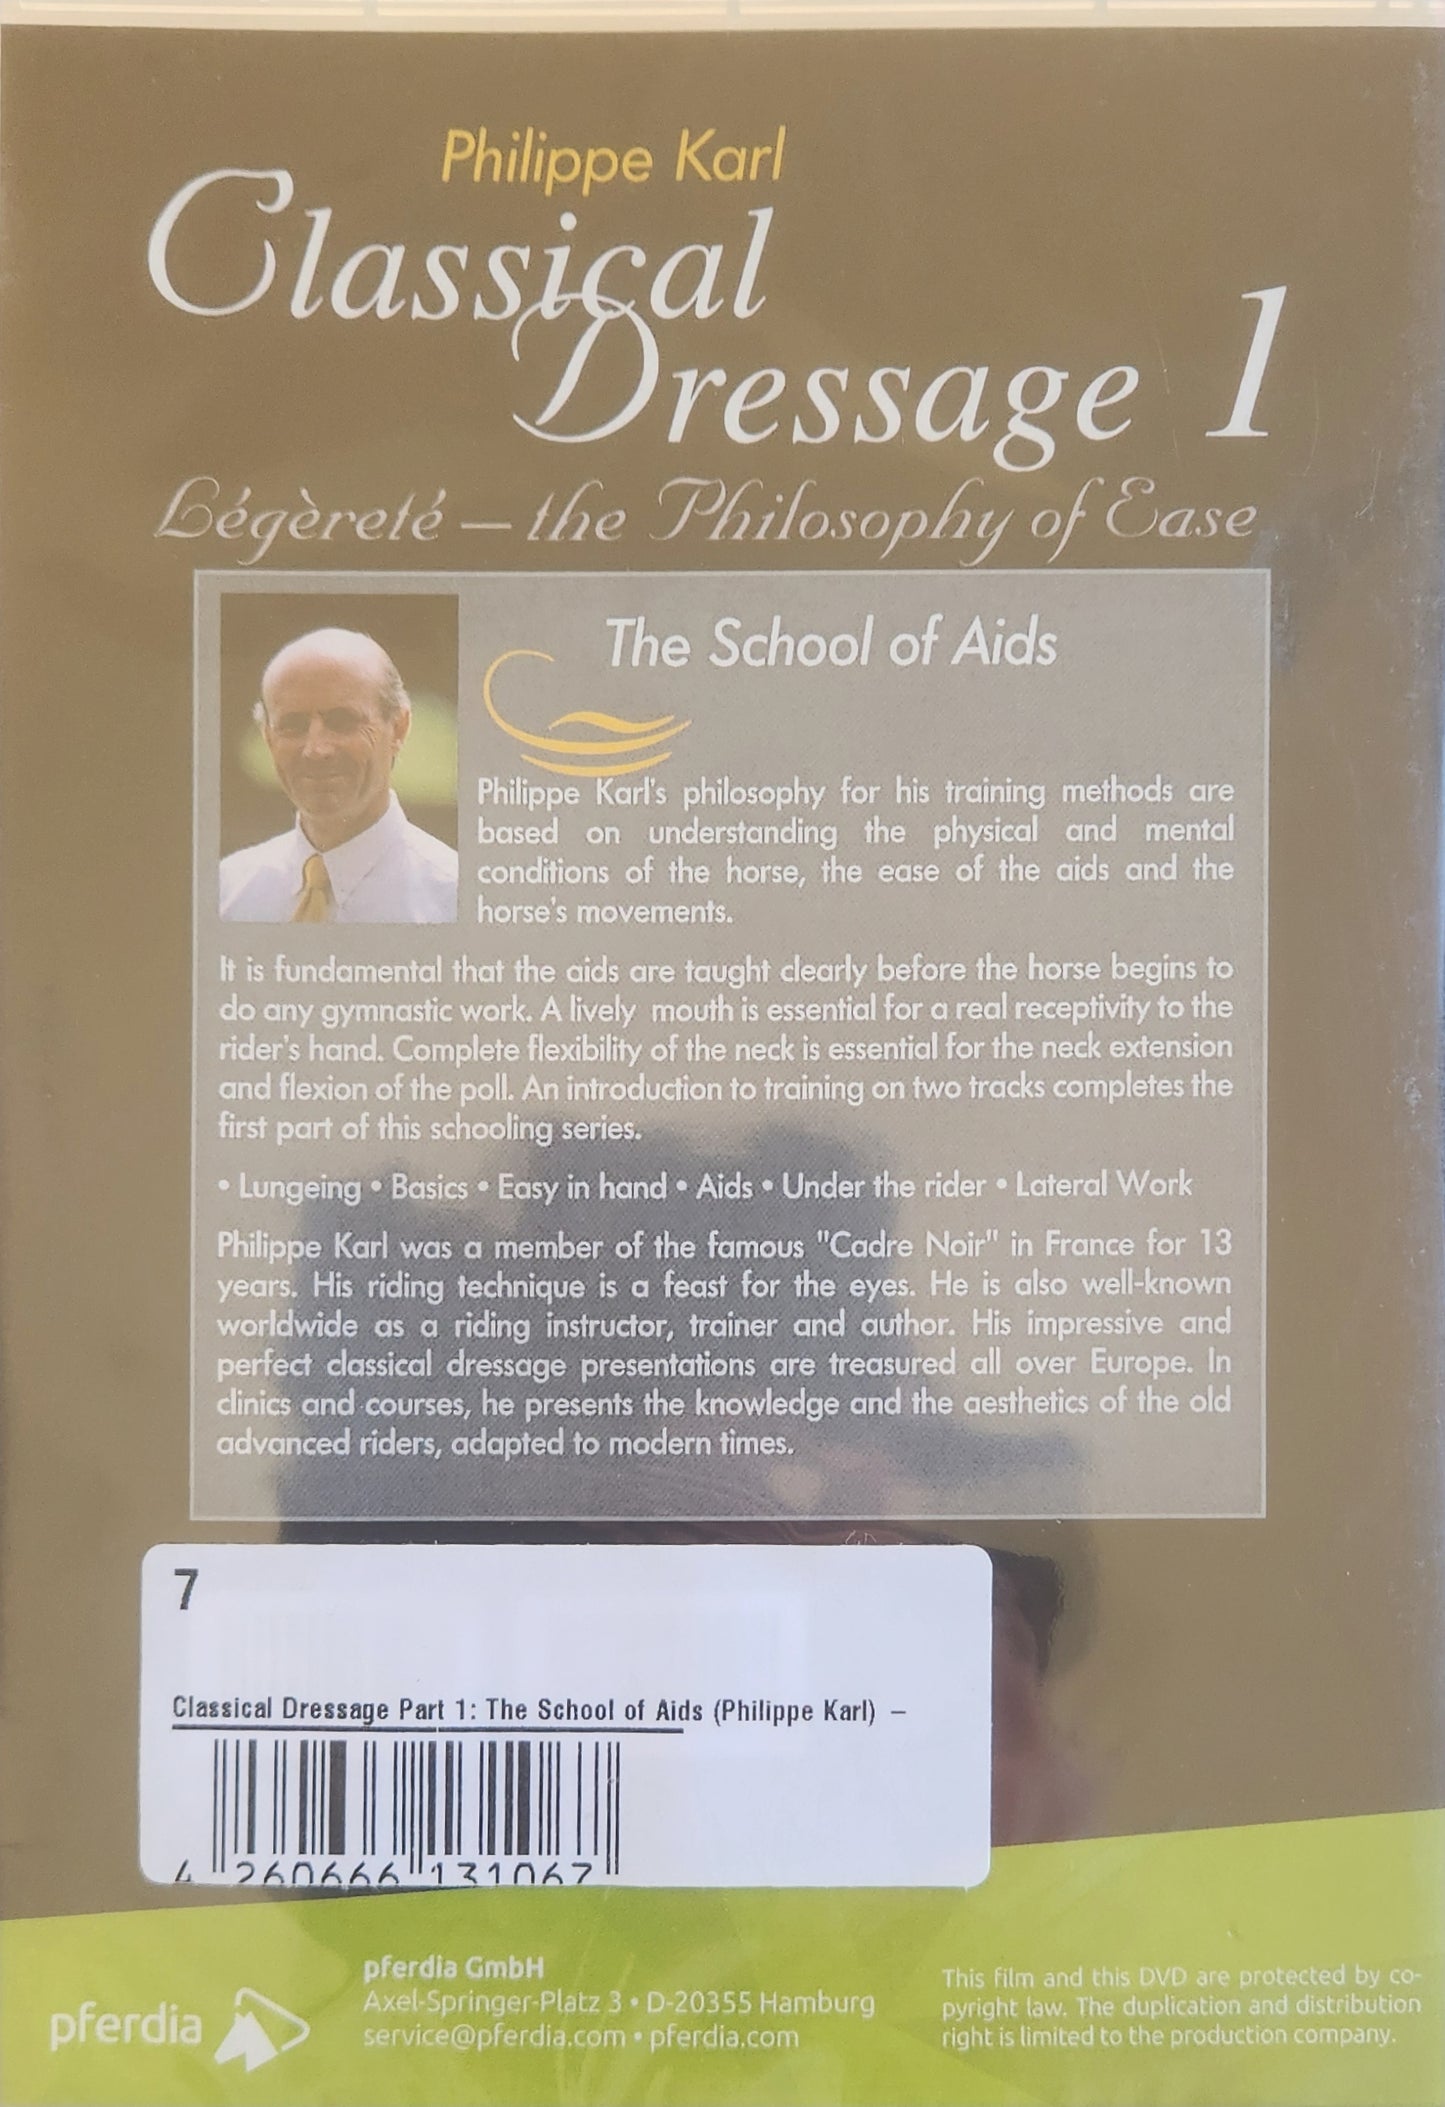 Classical Dressage vol. 1 The School of Aids (DVD)